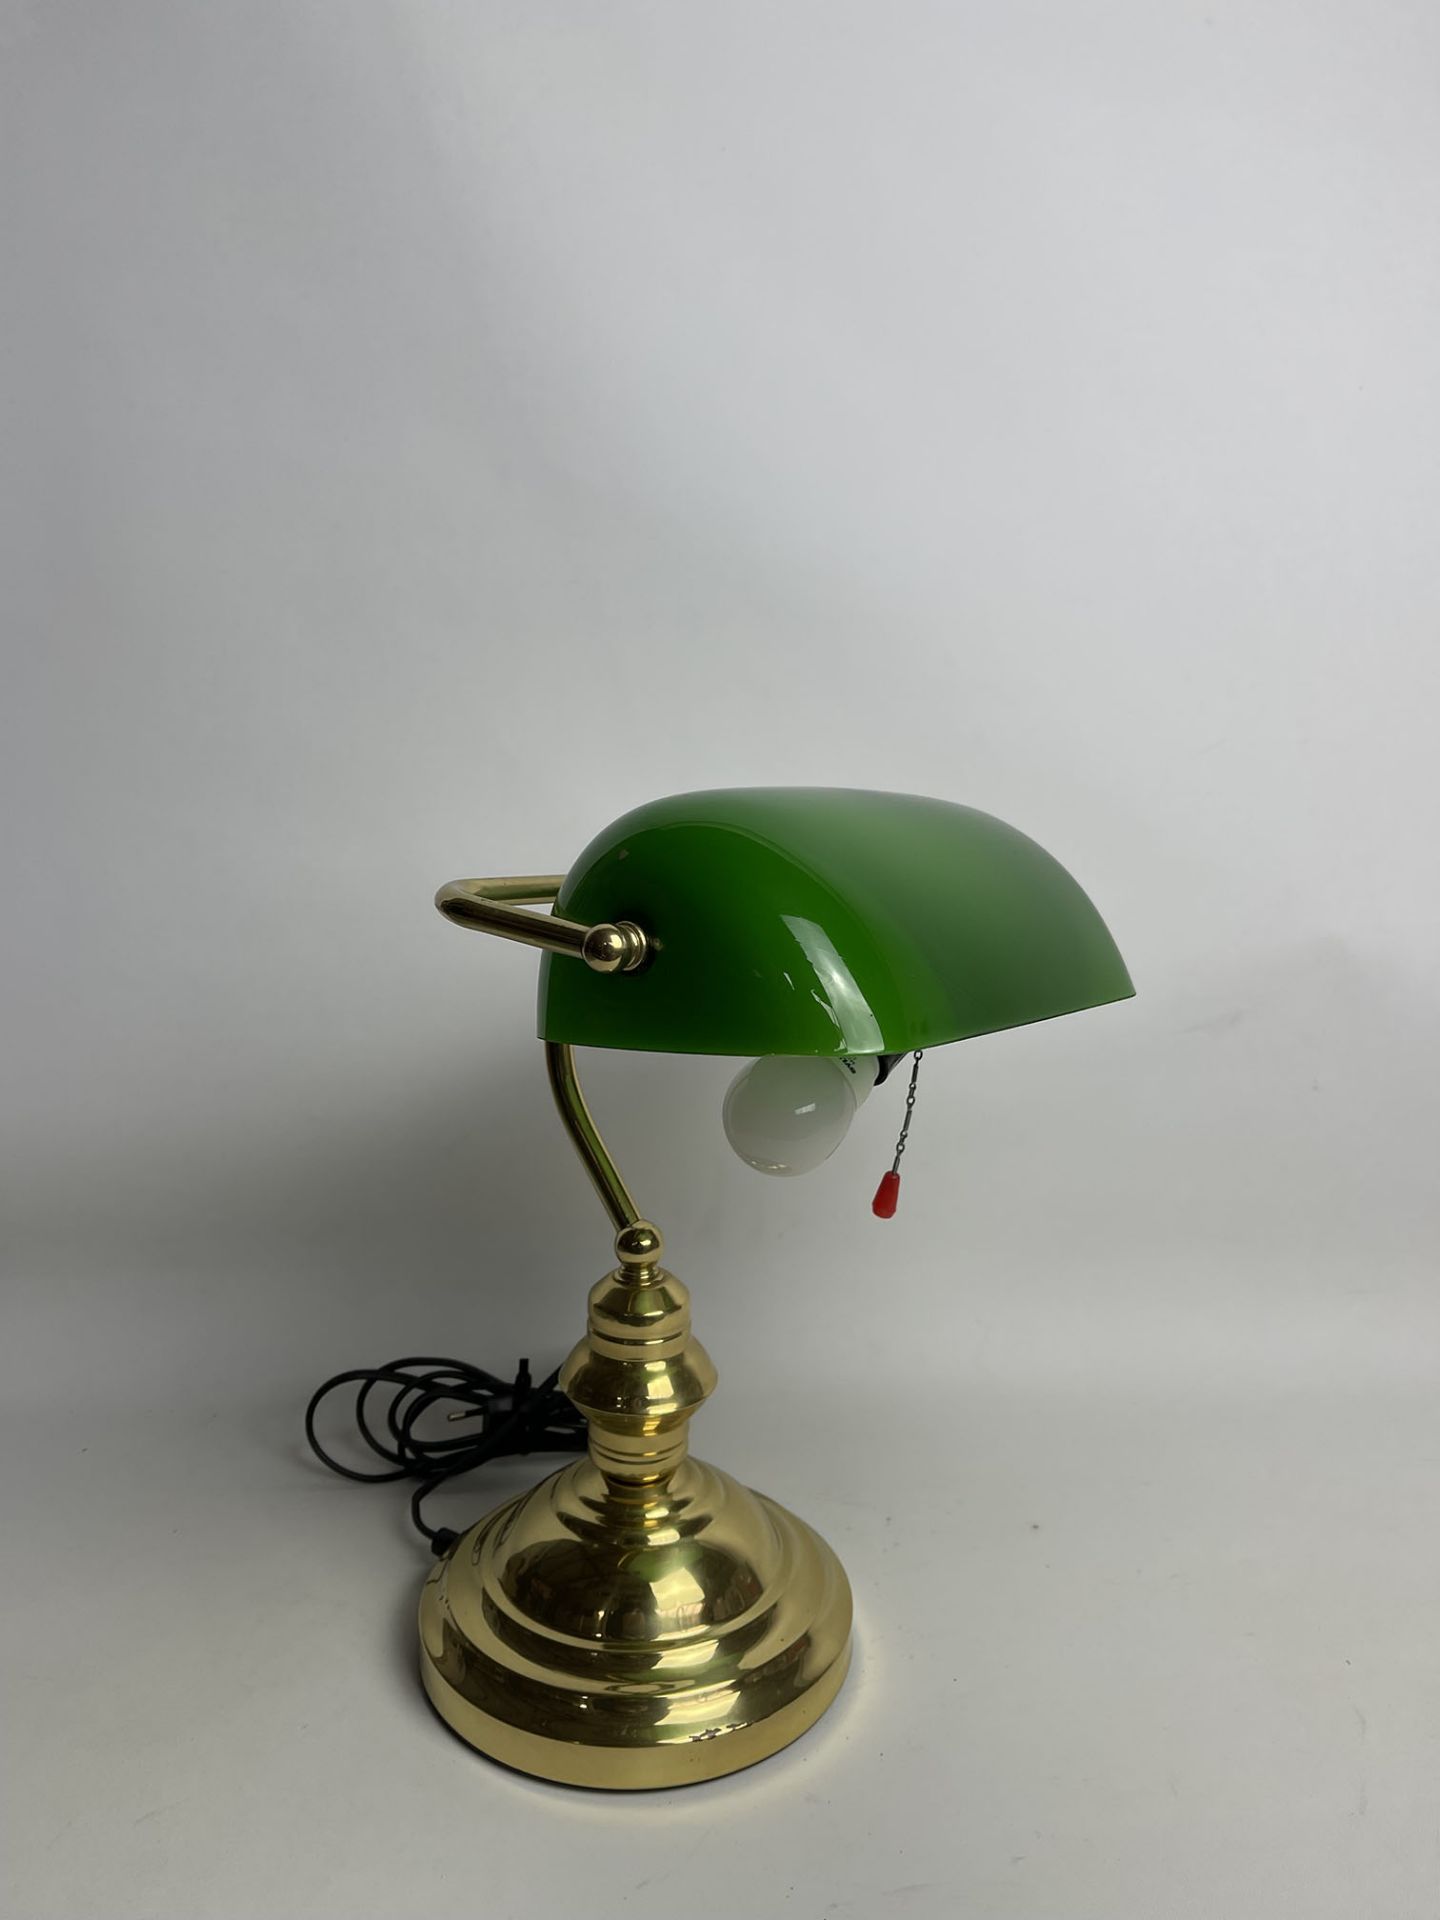 Vintage American Desk Lamp with Green Lamp Shade - Image 2 of 9